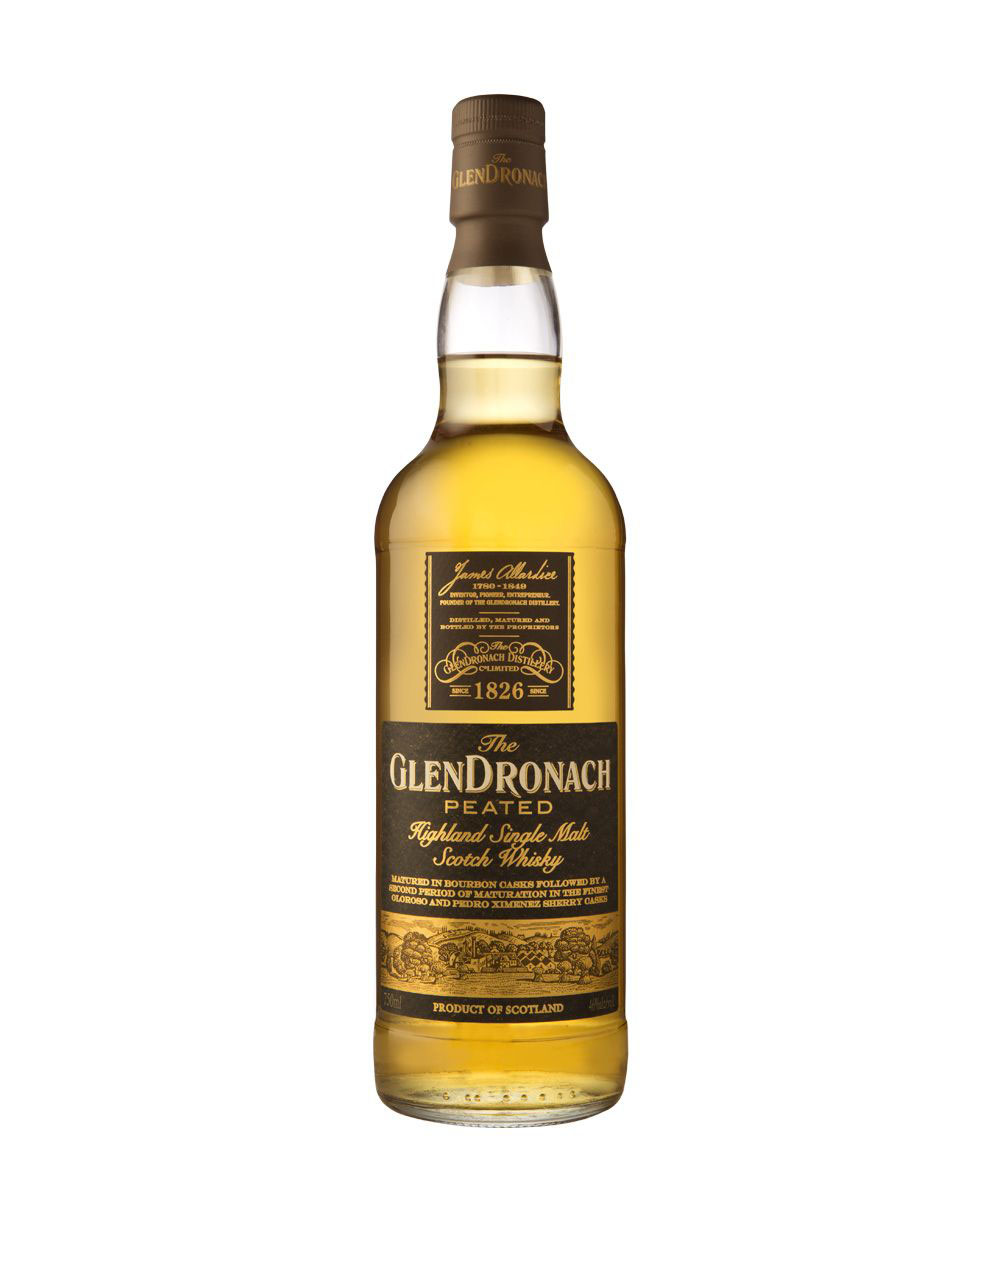 The Glendronach Peated